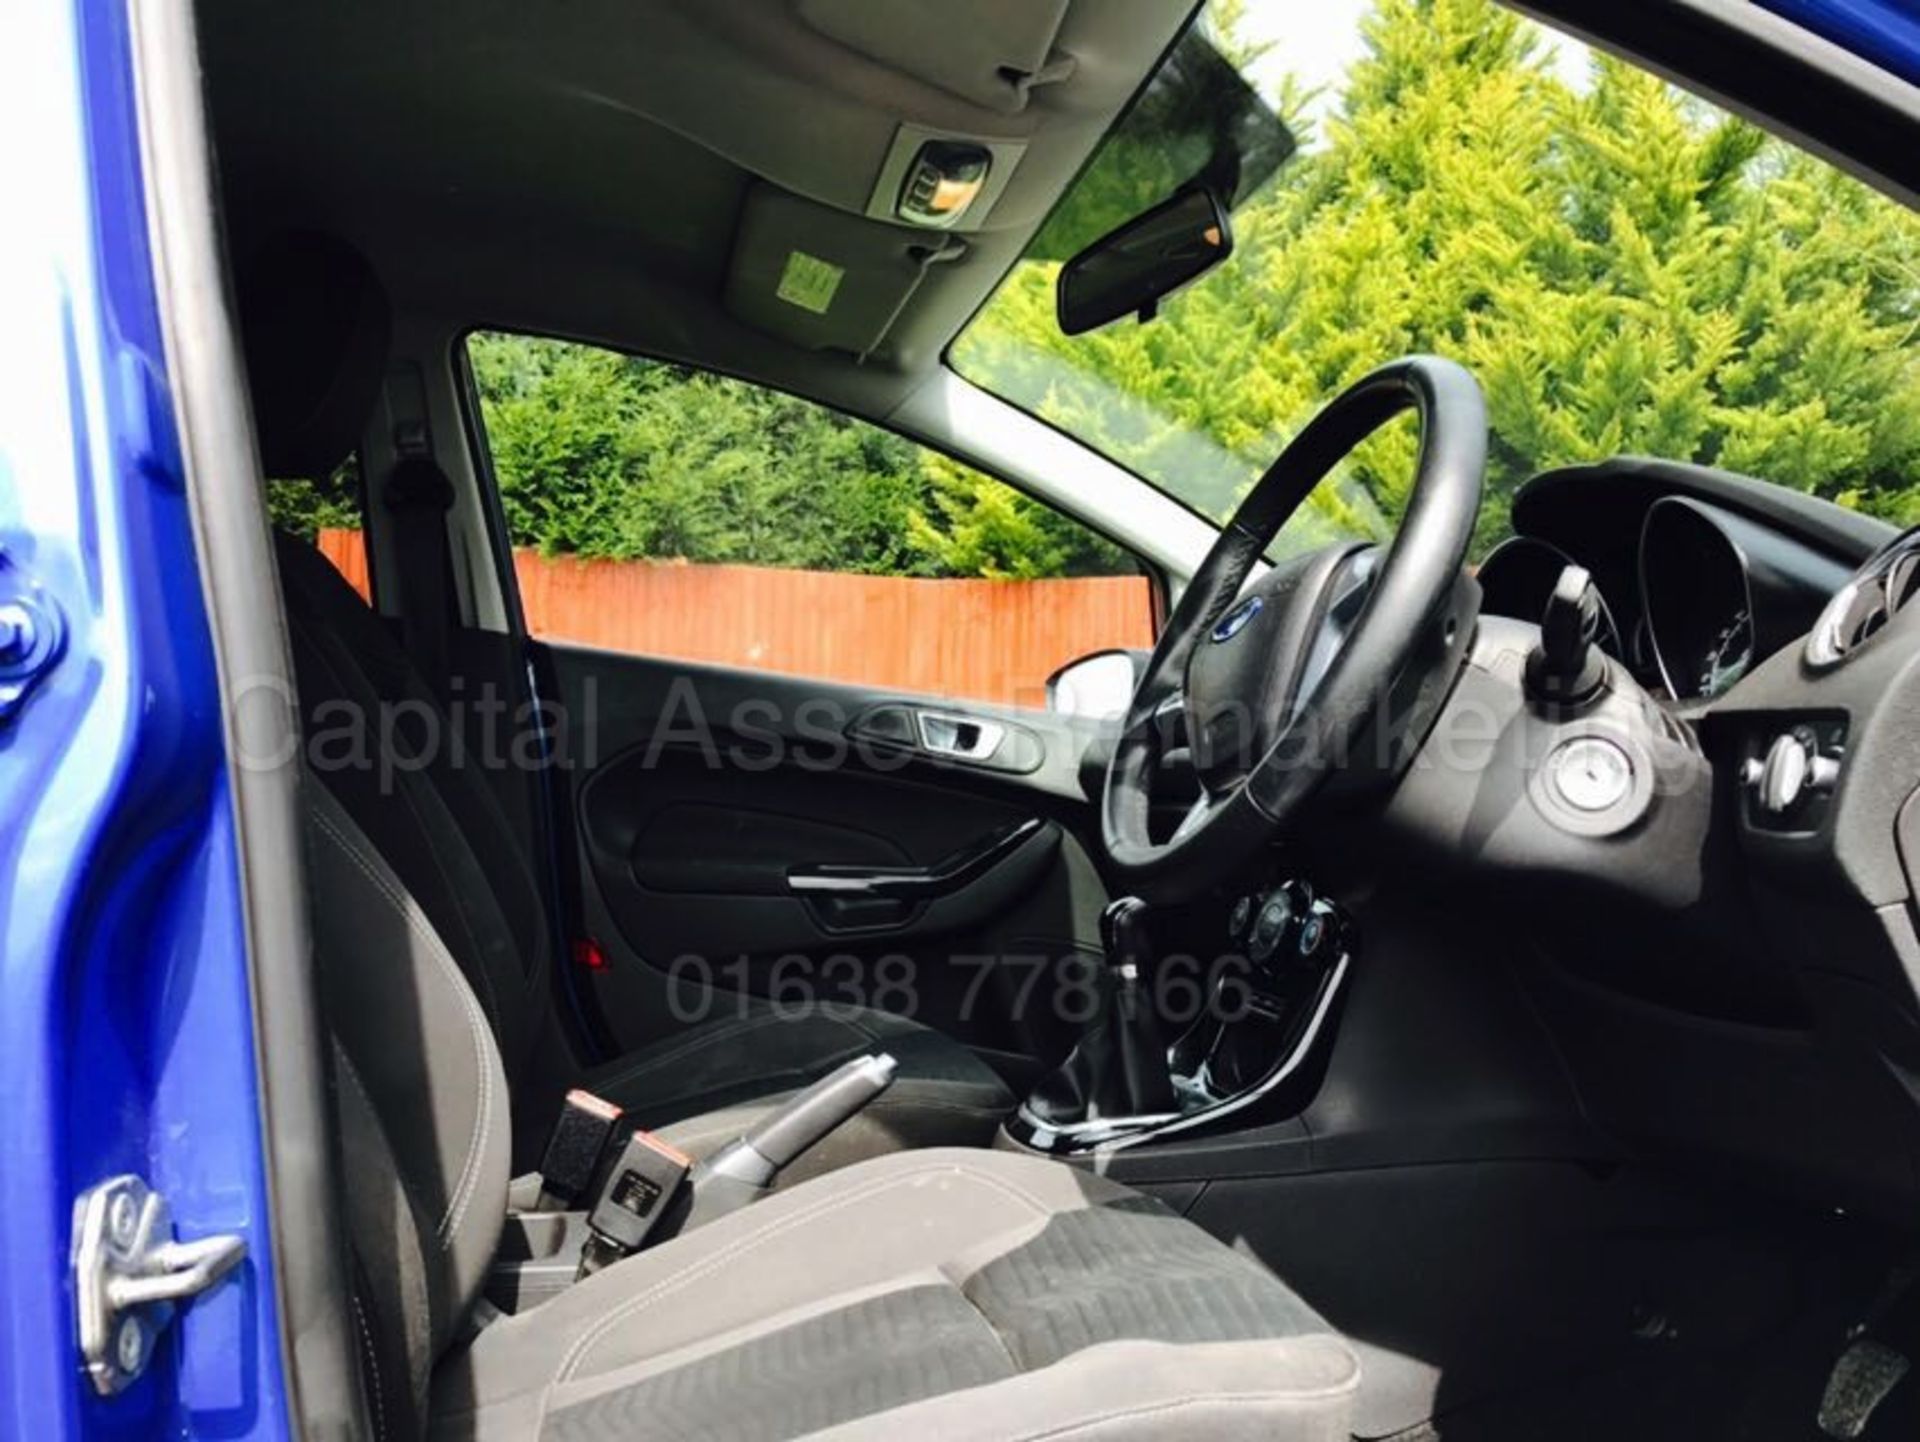 (ON SALE) FORD FIESTA 'ZETEC EDITION' HATCHBACK (2013 - 13 REG) '1.2 PETROL' *AIR CON* (LOW MILES) - Image 9 of 14